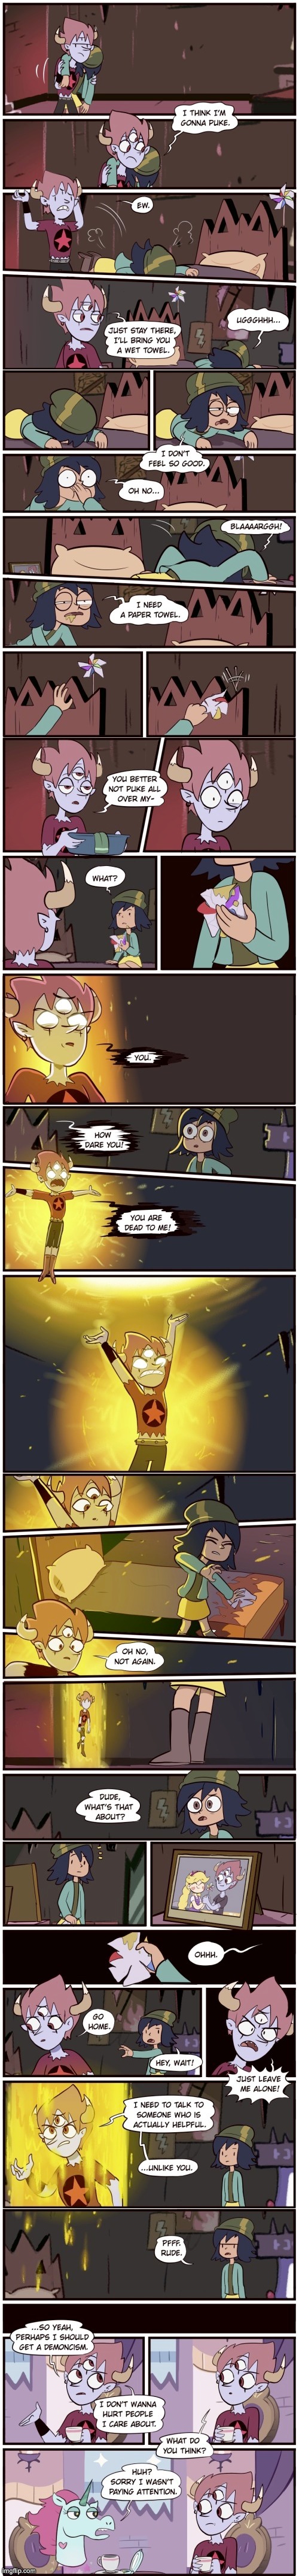 Tom vs Jannanigans: To Make A Head Spin (Part 2) | image tagged in morningmark,svtfoe,comics,star vs the forces of evil,comics/cartoons,memes | made w/ Imgflip meme maker